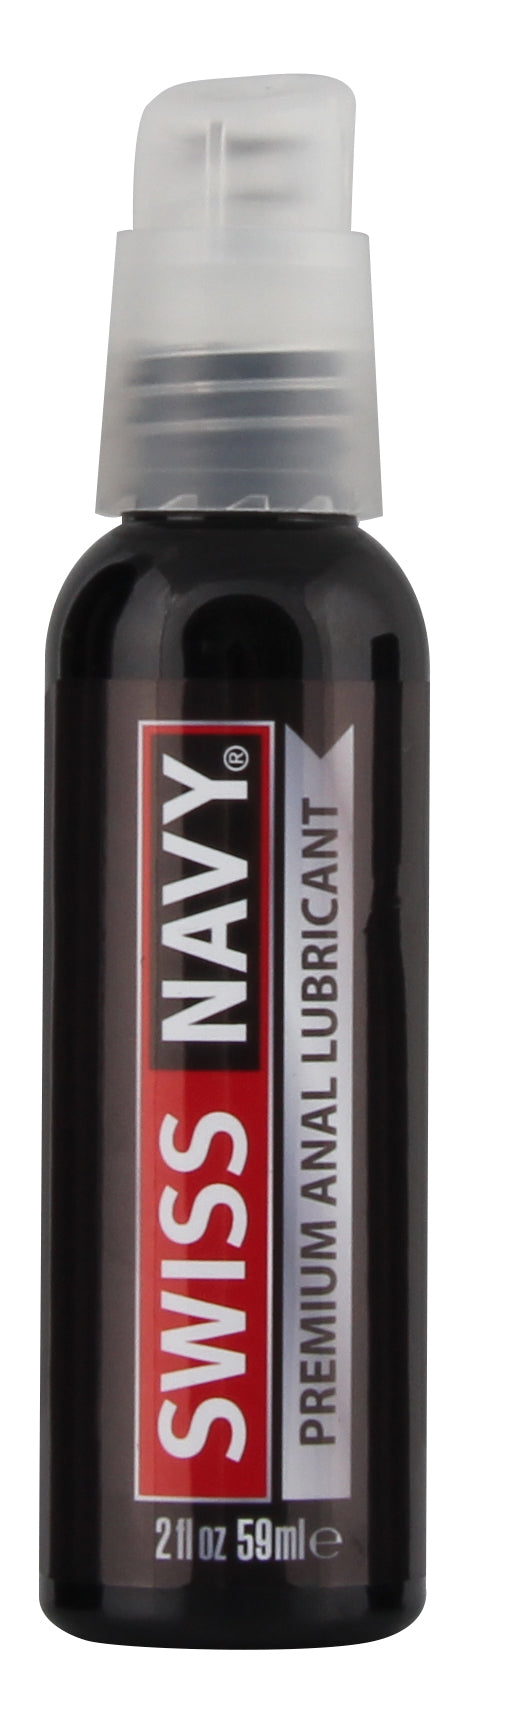 Swiss Navy Premium Silicone-Based Anal Lubricant with Desensitizing Clove Oil